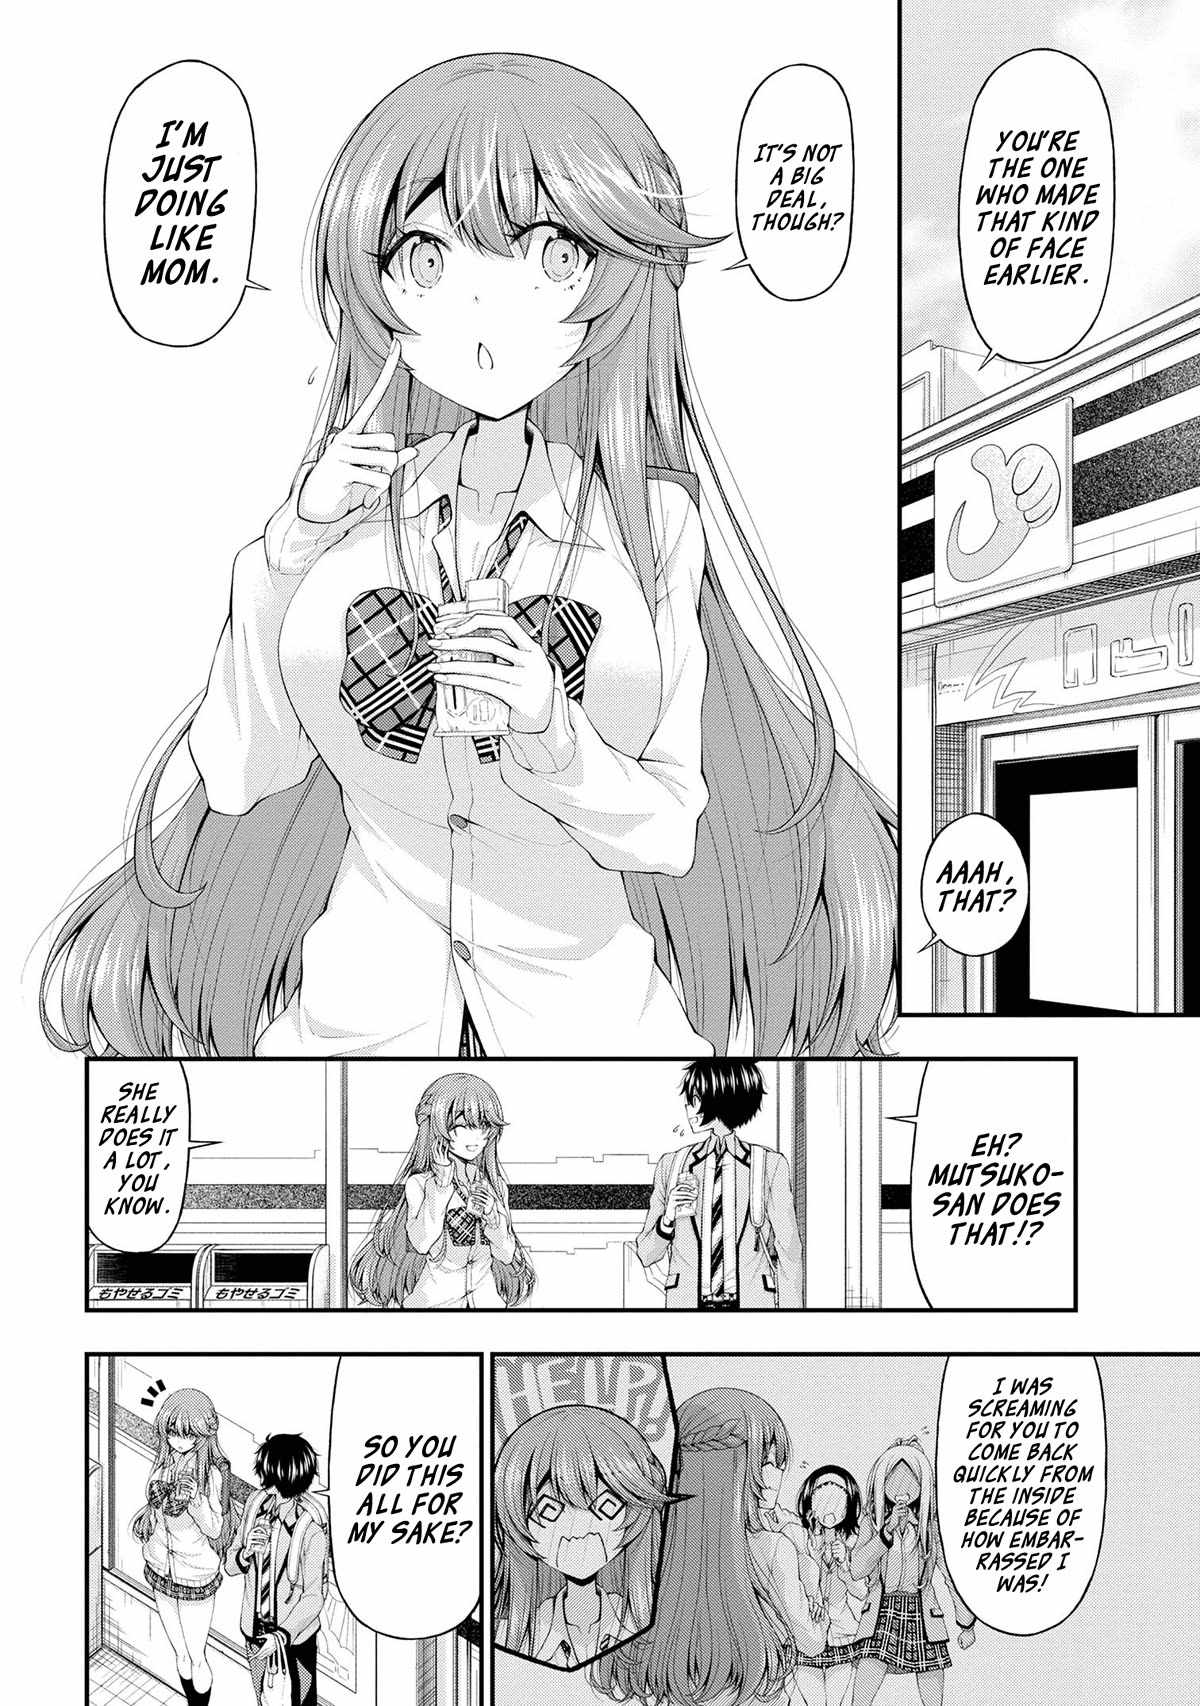 The Gal Who Was Meant to Confess to Me as a Game Punishment Has Apparently Fallen in Love with Me Chapter 13-eng-li - Page 15